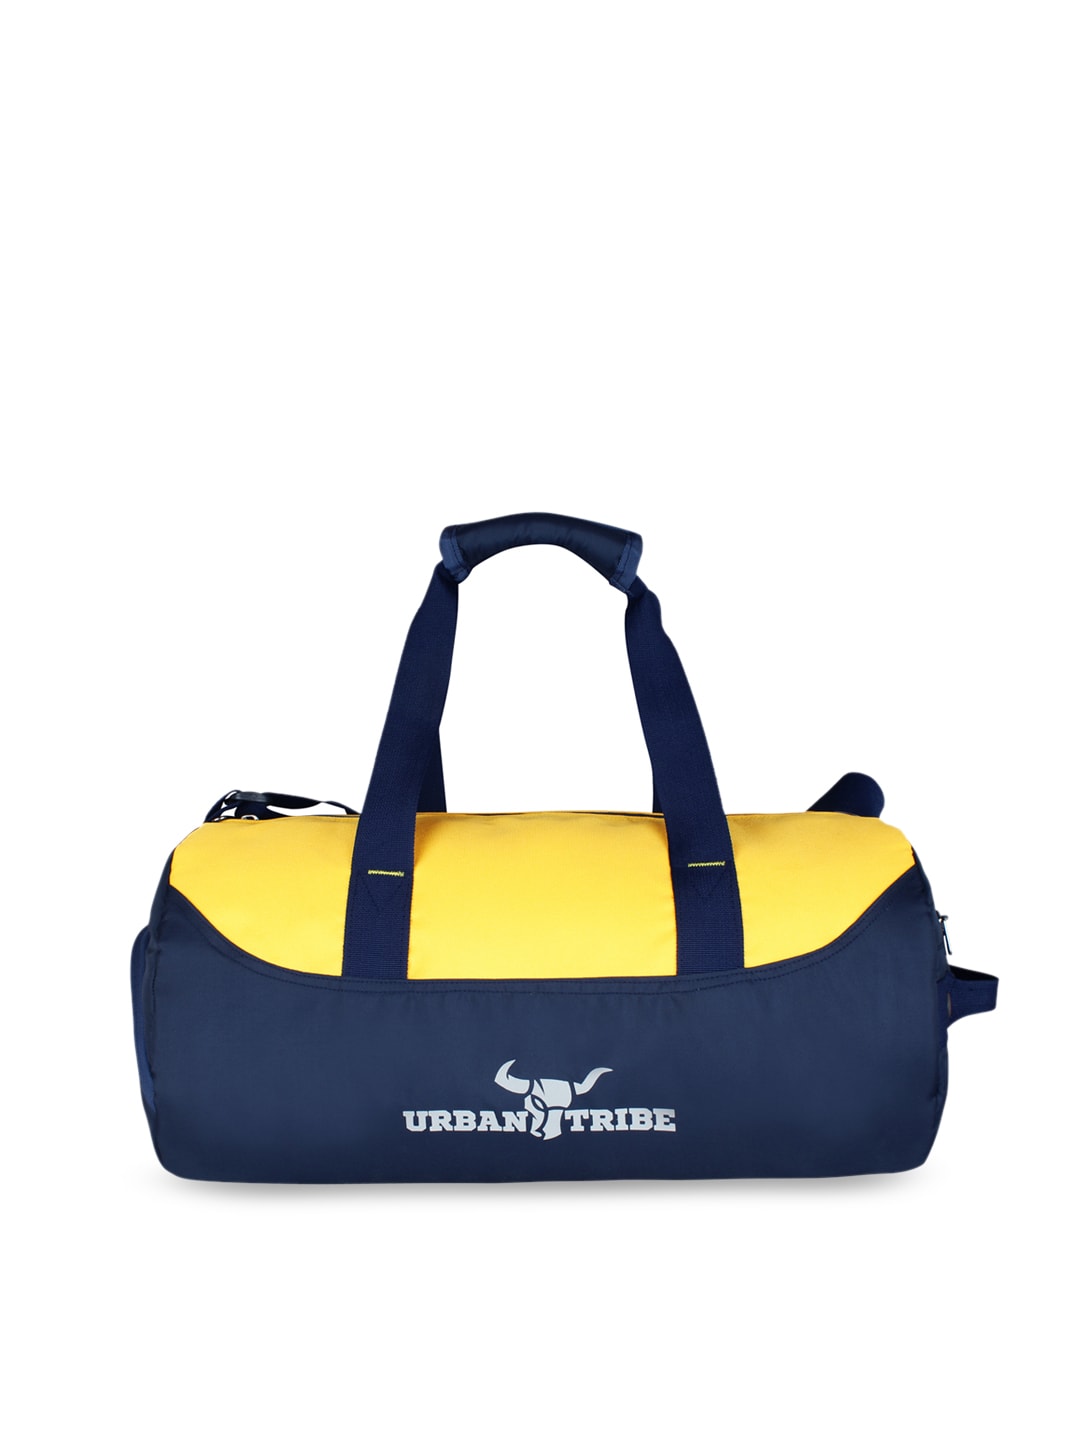 Urban Tribe Bolt Navy Blue & Yellow Gym Duffel Bag Price in India